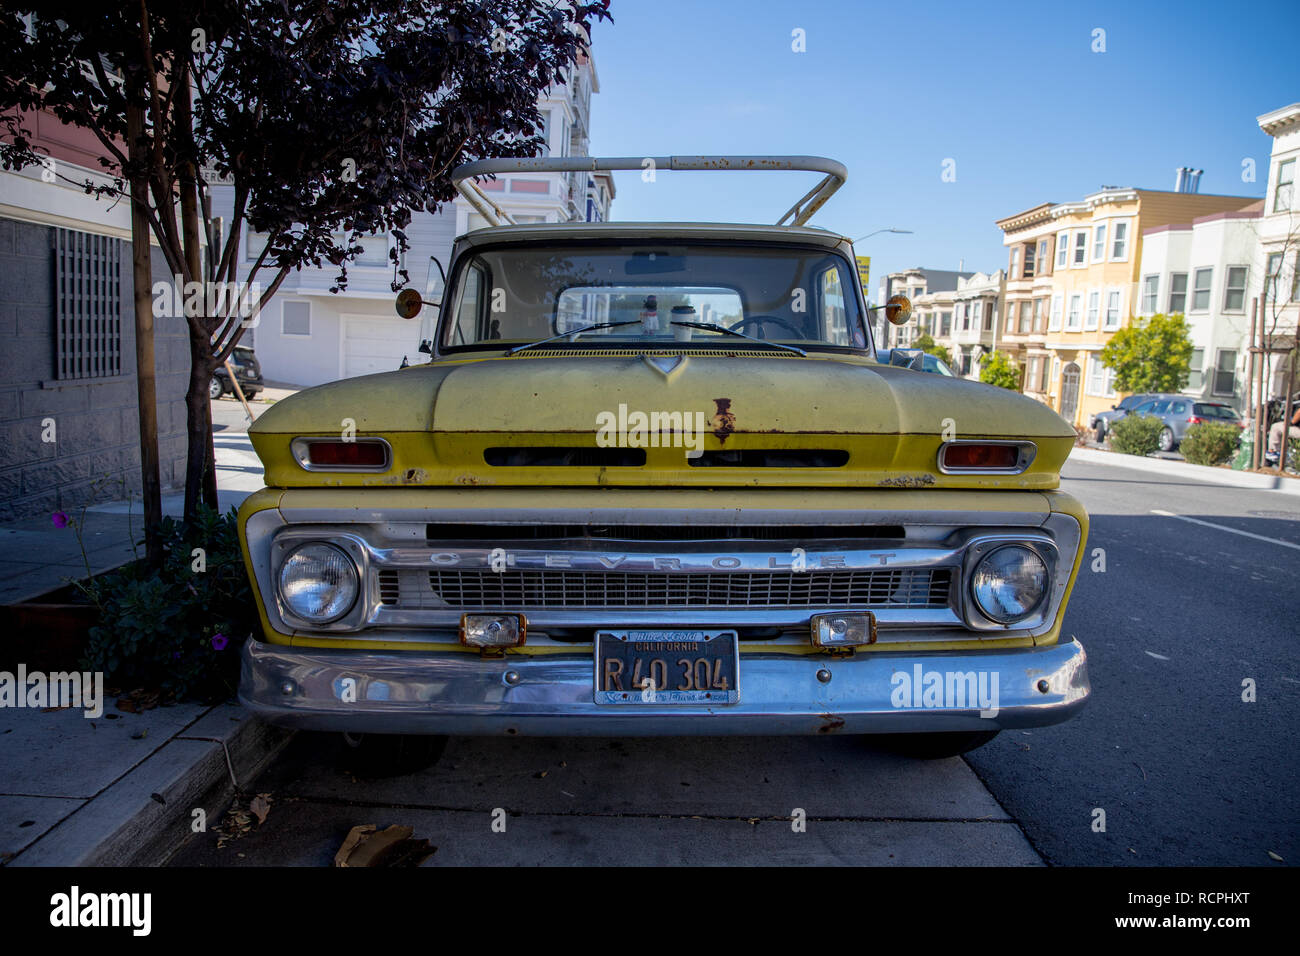 Vintage Chevrolet Pickup Truck in San Francisco Yellow Stock Photo